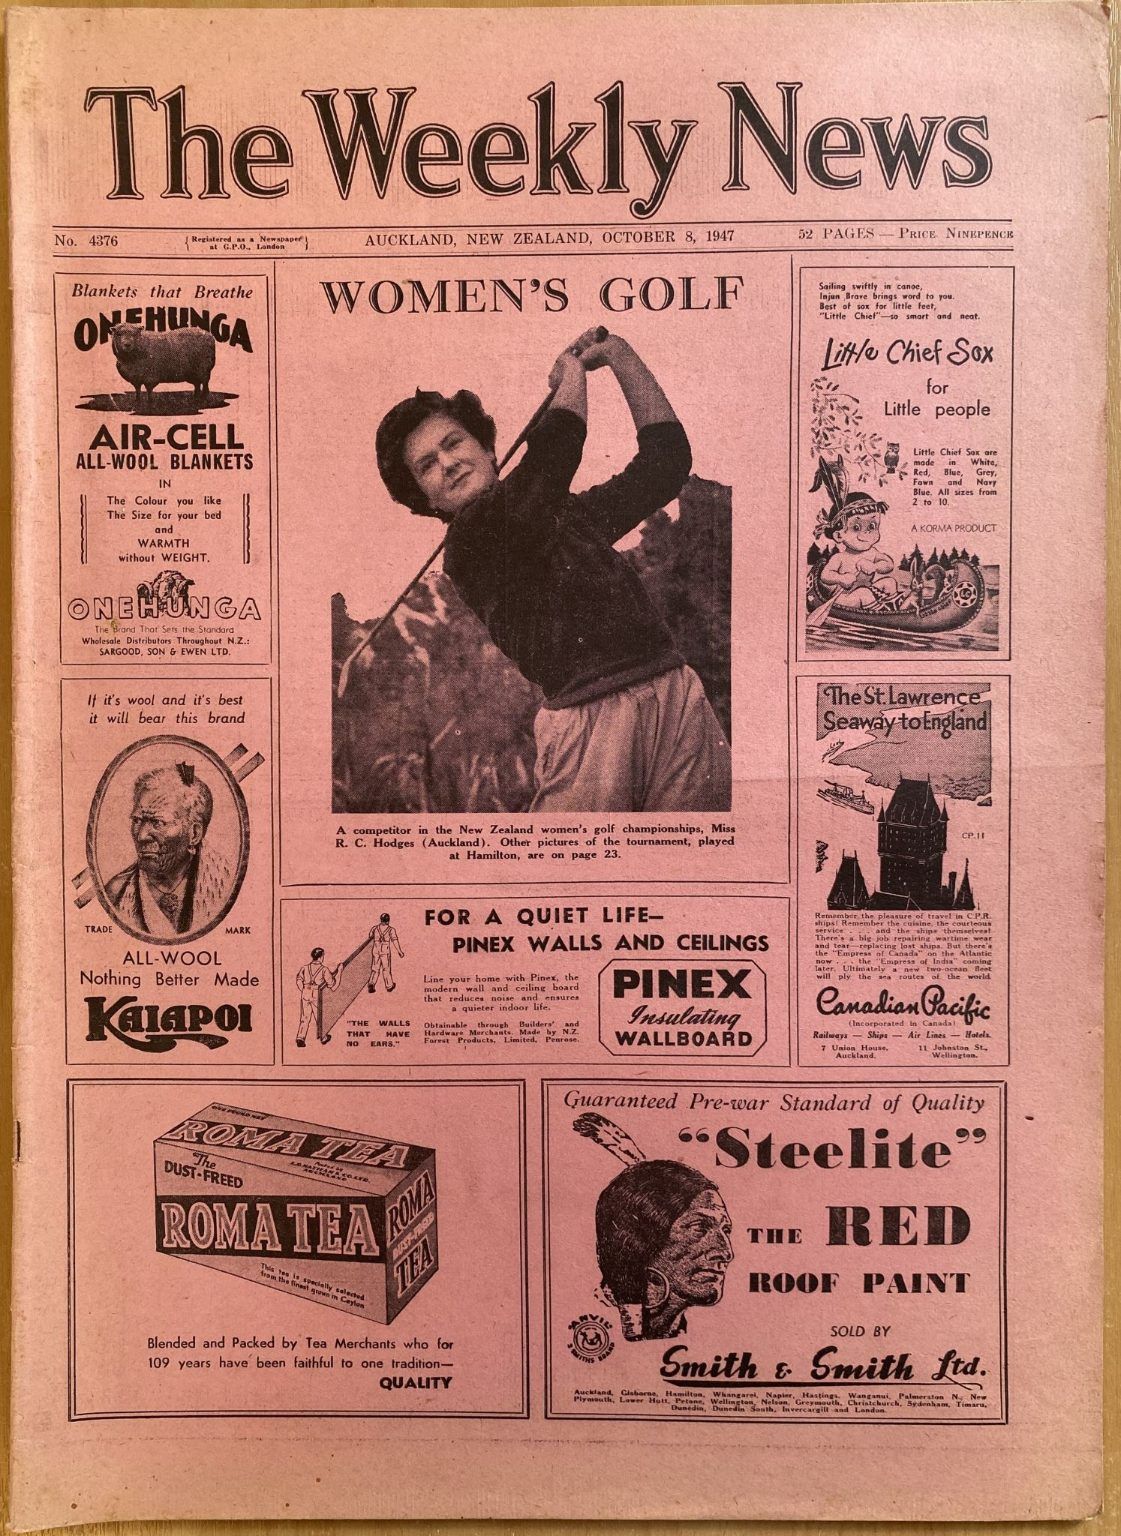 OLD NEWSPAPER: The Weekly News, No. 4376, 8 October 1947